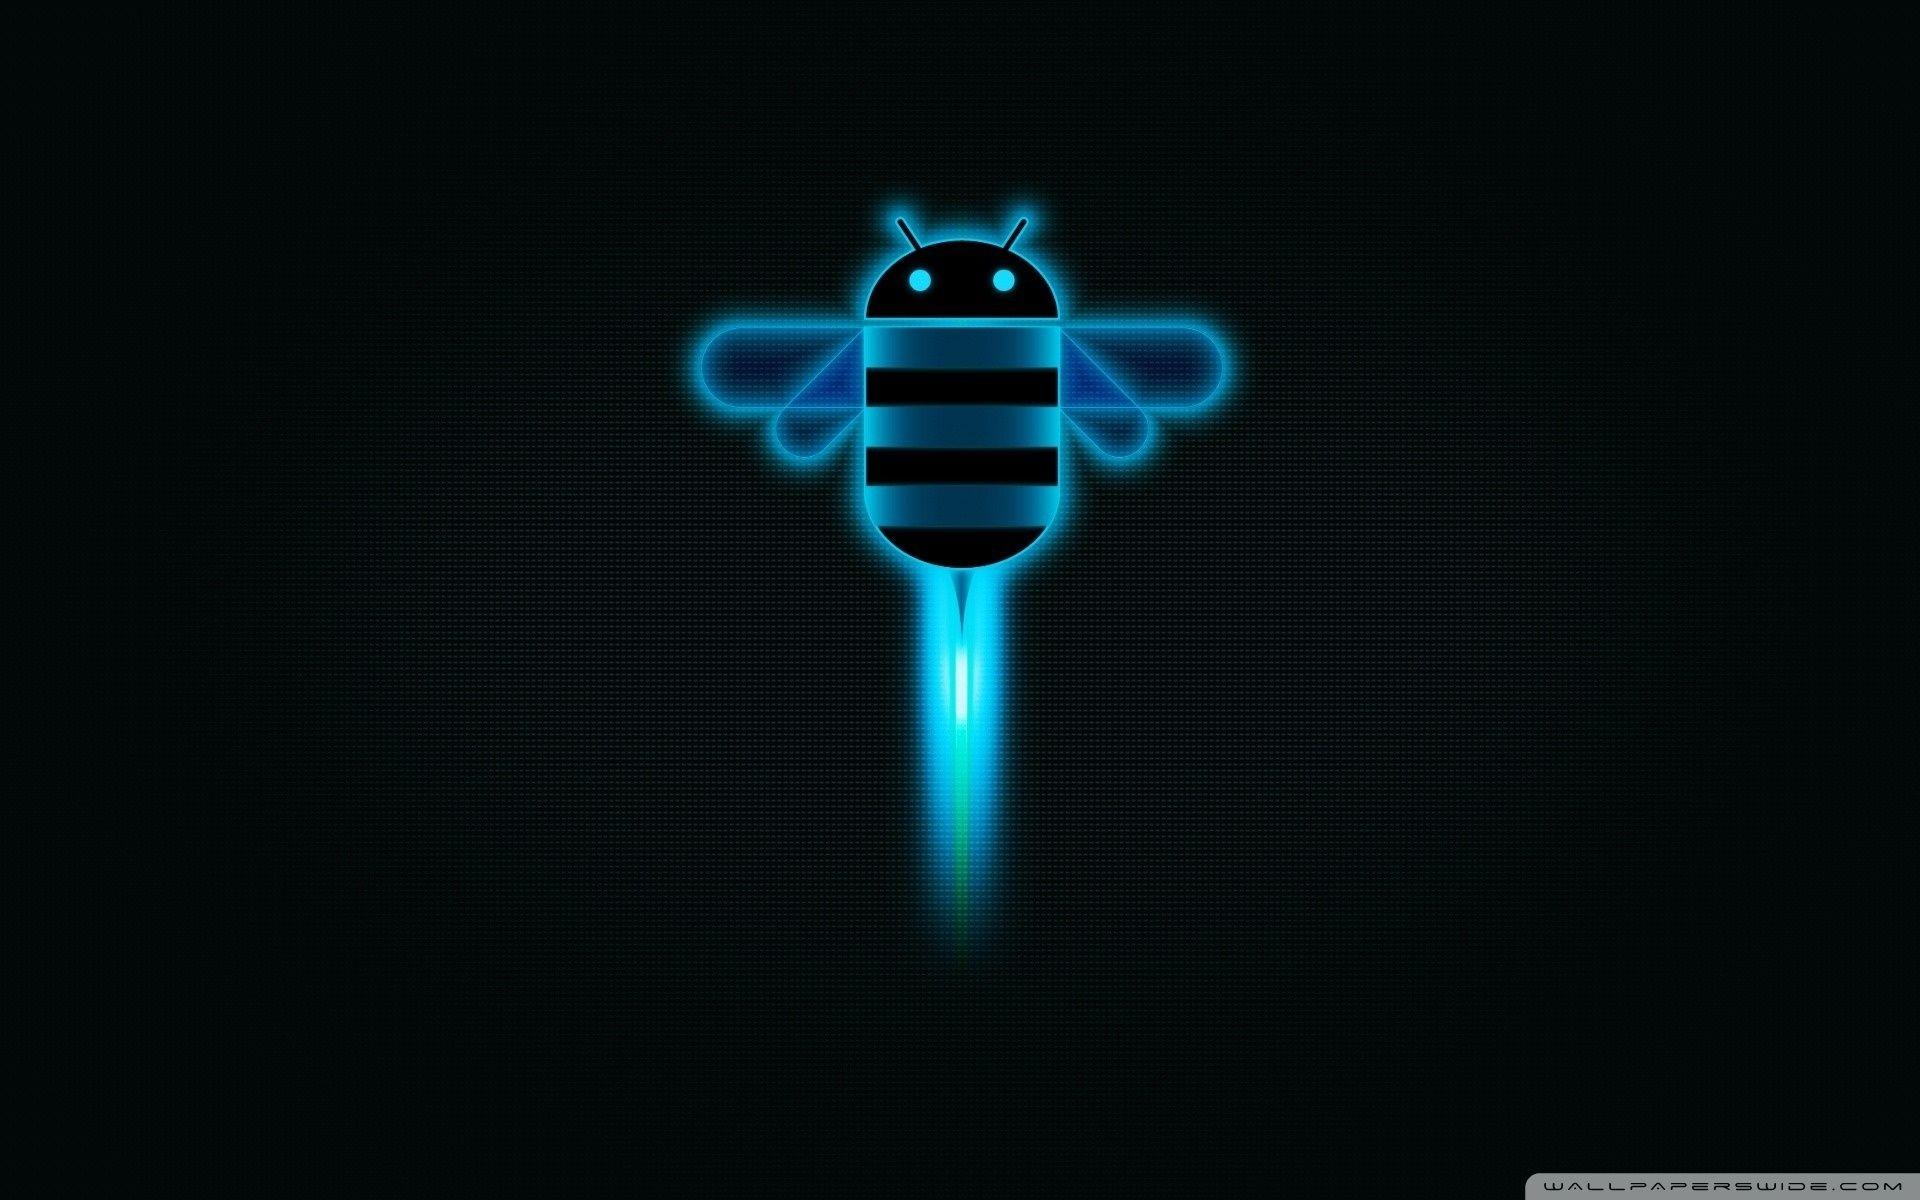 Android Honeycomb Bee. HD wallpaper android, Honeycomb wallpaper, Android wallpaper